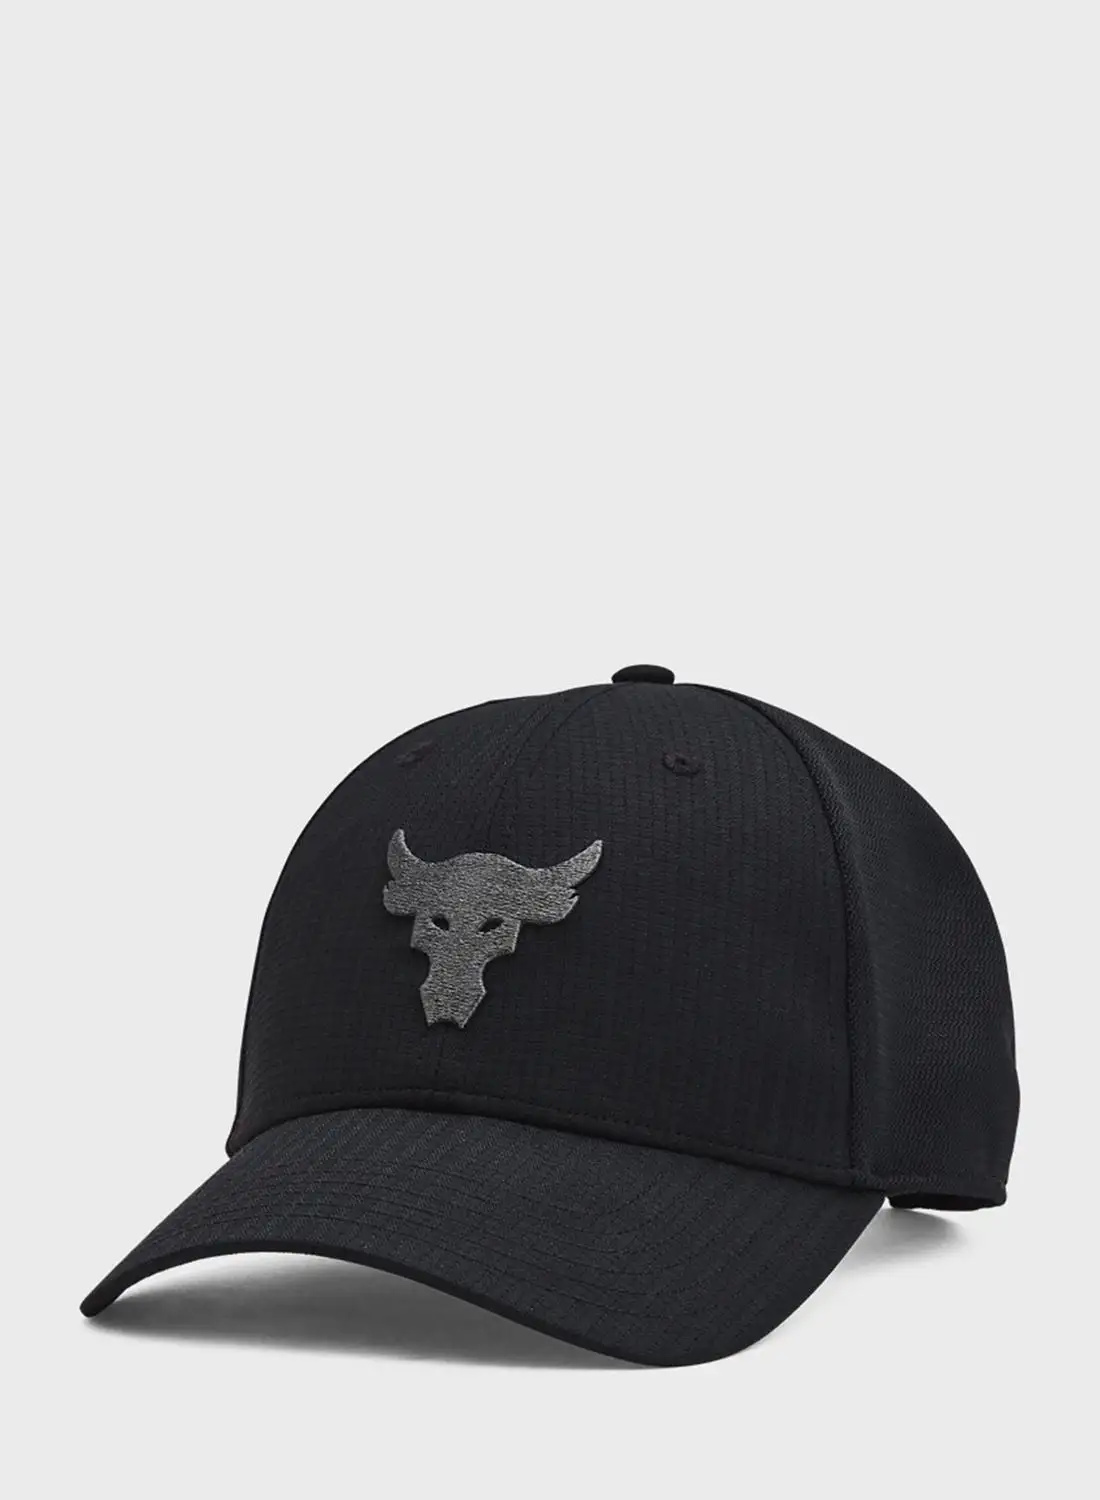 UNDER ARMOUR Project Rock Trucker